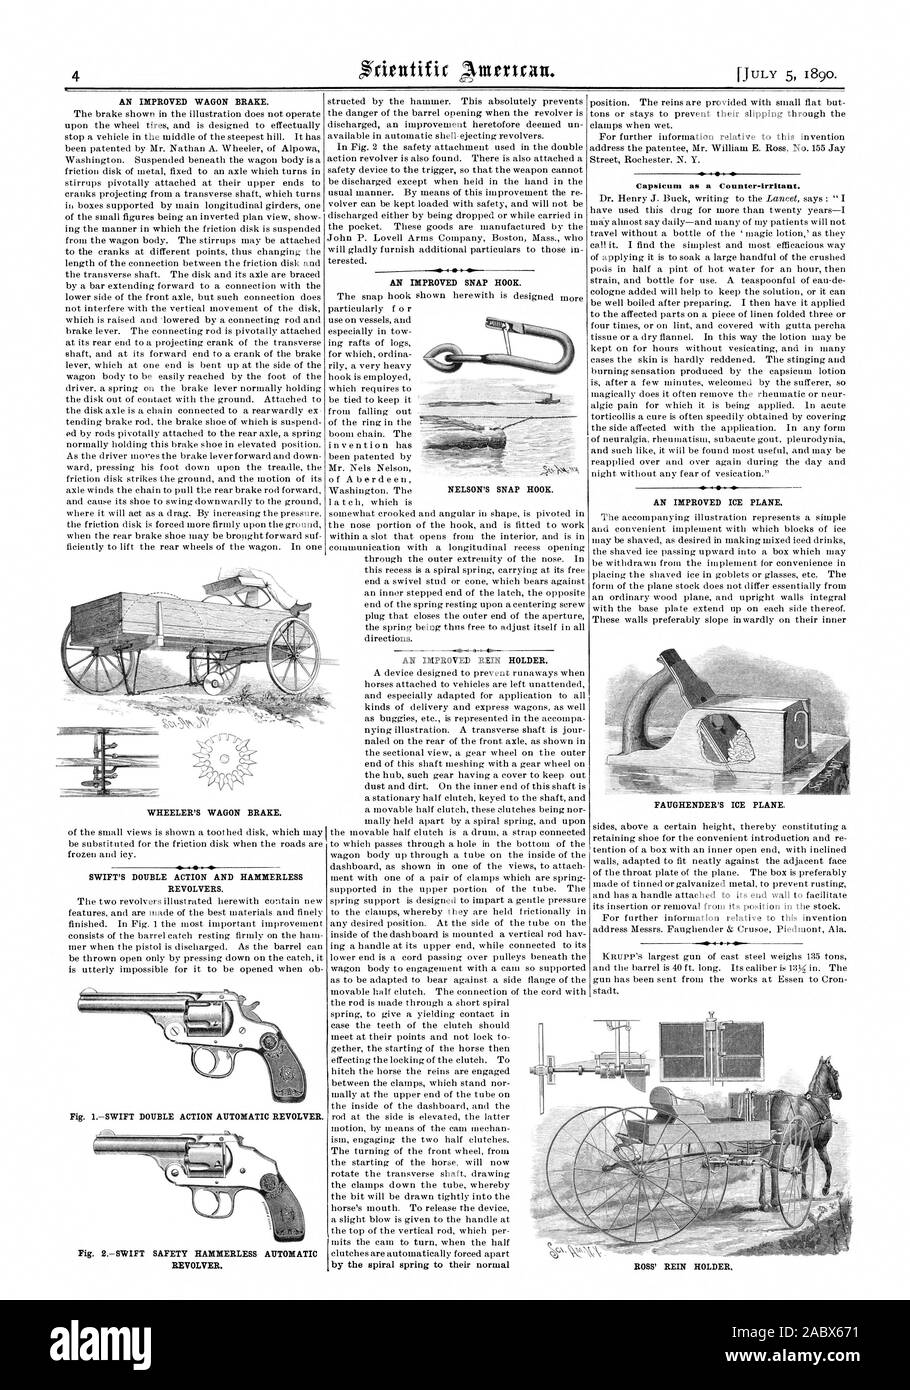 AN IMPROVED WAGON BRAKE. SWIFT'S DOUBLE ACTION AND HAMMERLESS REVOLVERS. REVOLVER. AN IMPROVED SNAP HOOK. AN IMPROVED REIN HOLDER. Capsicum as a Counter-irritant. AN IMPROVED ICE PLANE. NELSON'S SNAP HOOK. WHEELER'S WAGON BRAKE. FAUGHENDEWS HM PLANE ROSS' REIN HOLDER., scientific american, 1890-07-05 Stock Photo